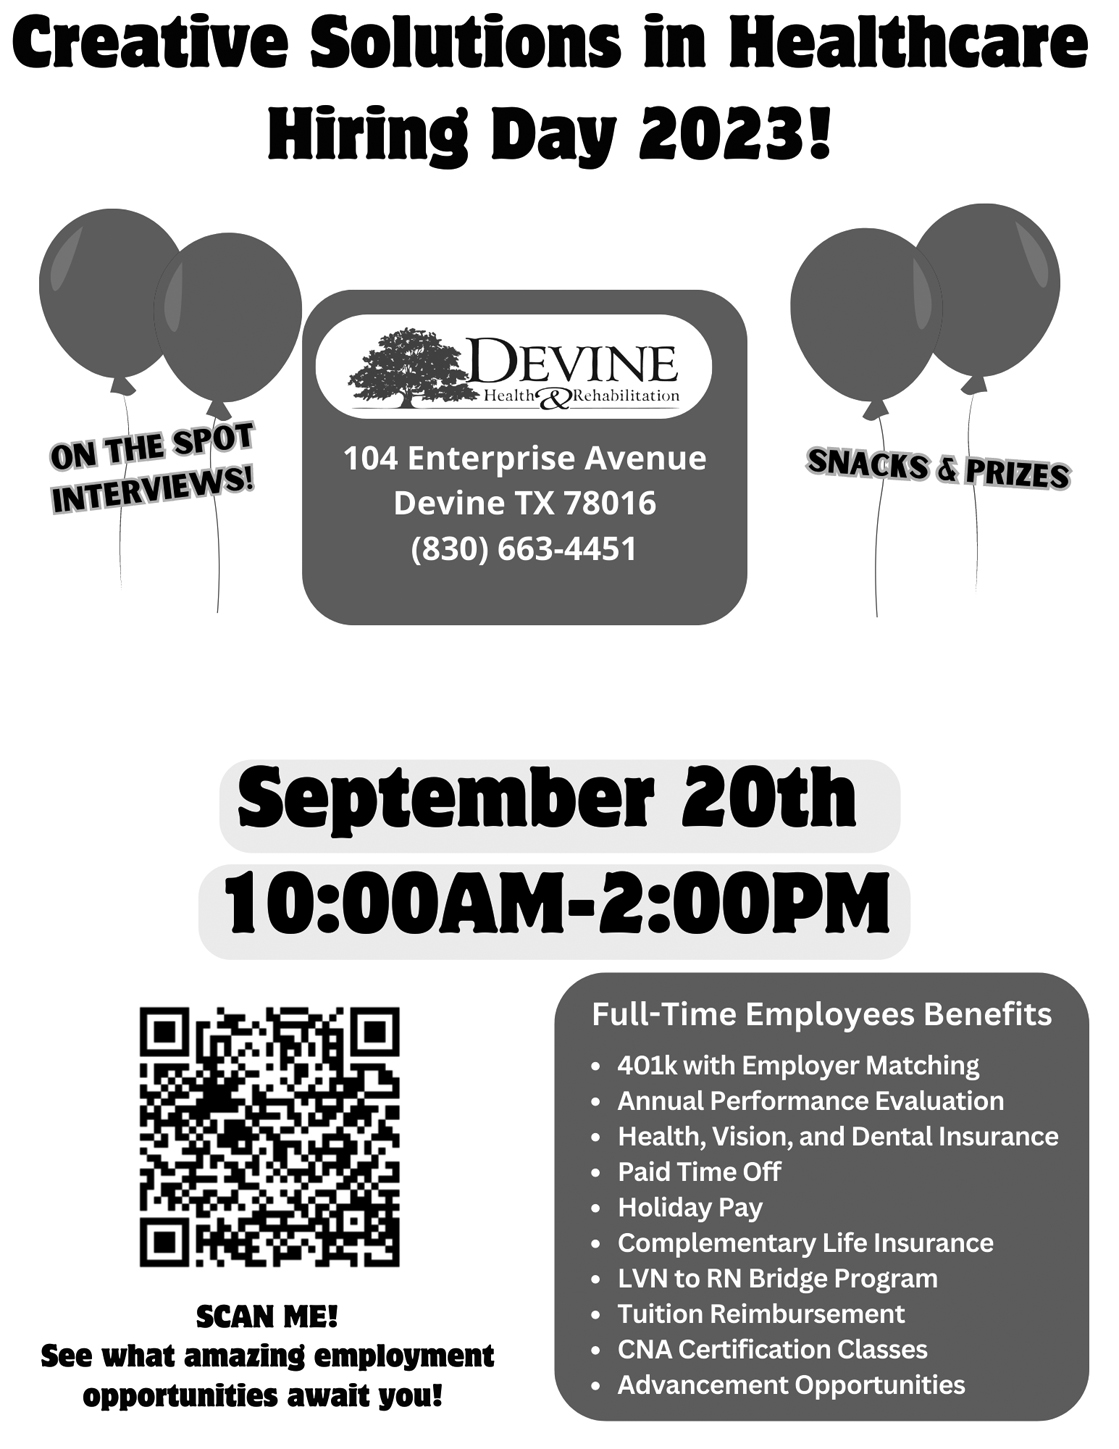 Devine Health and Rehab to host Healthcare Hiring day on Sept. 20